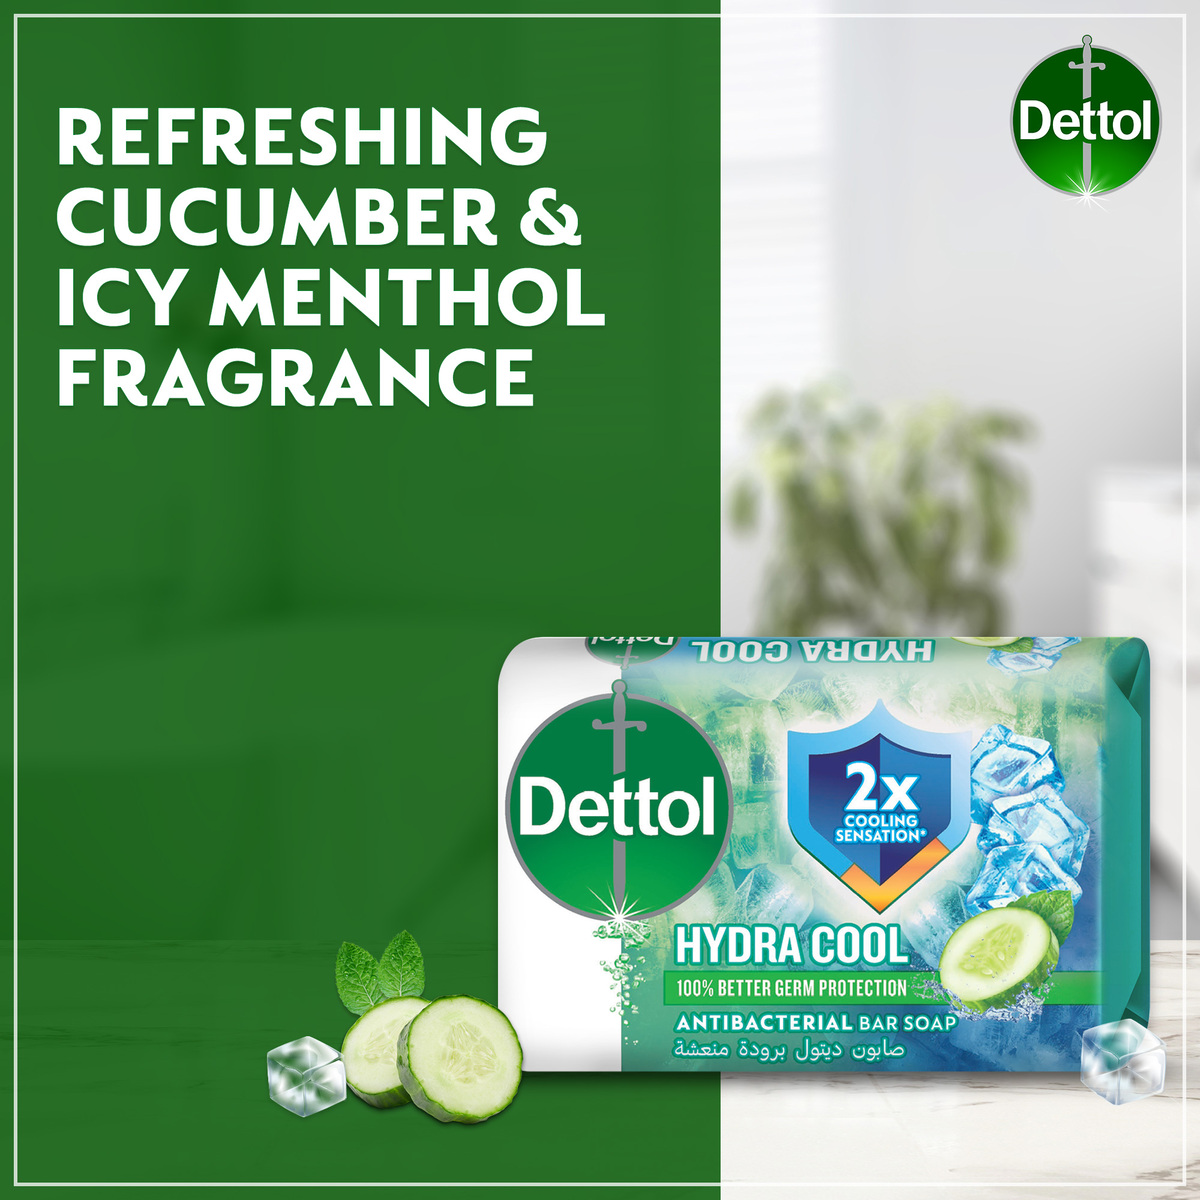 Dettol Hydra Cool Antibacterial Bar Soap Cucumber & Icy Menthol Fragrance Value Pack 4 x 120 g